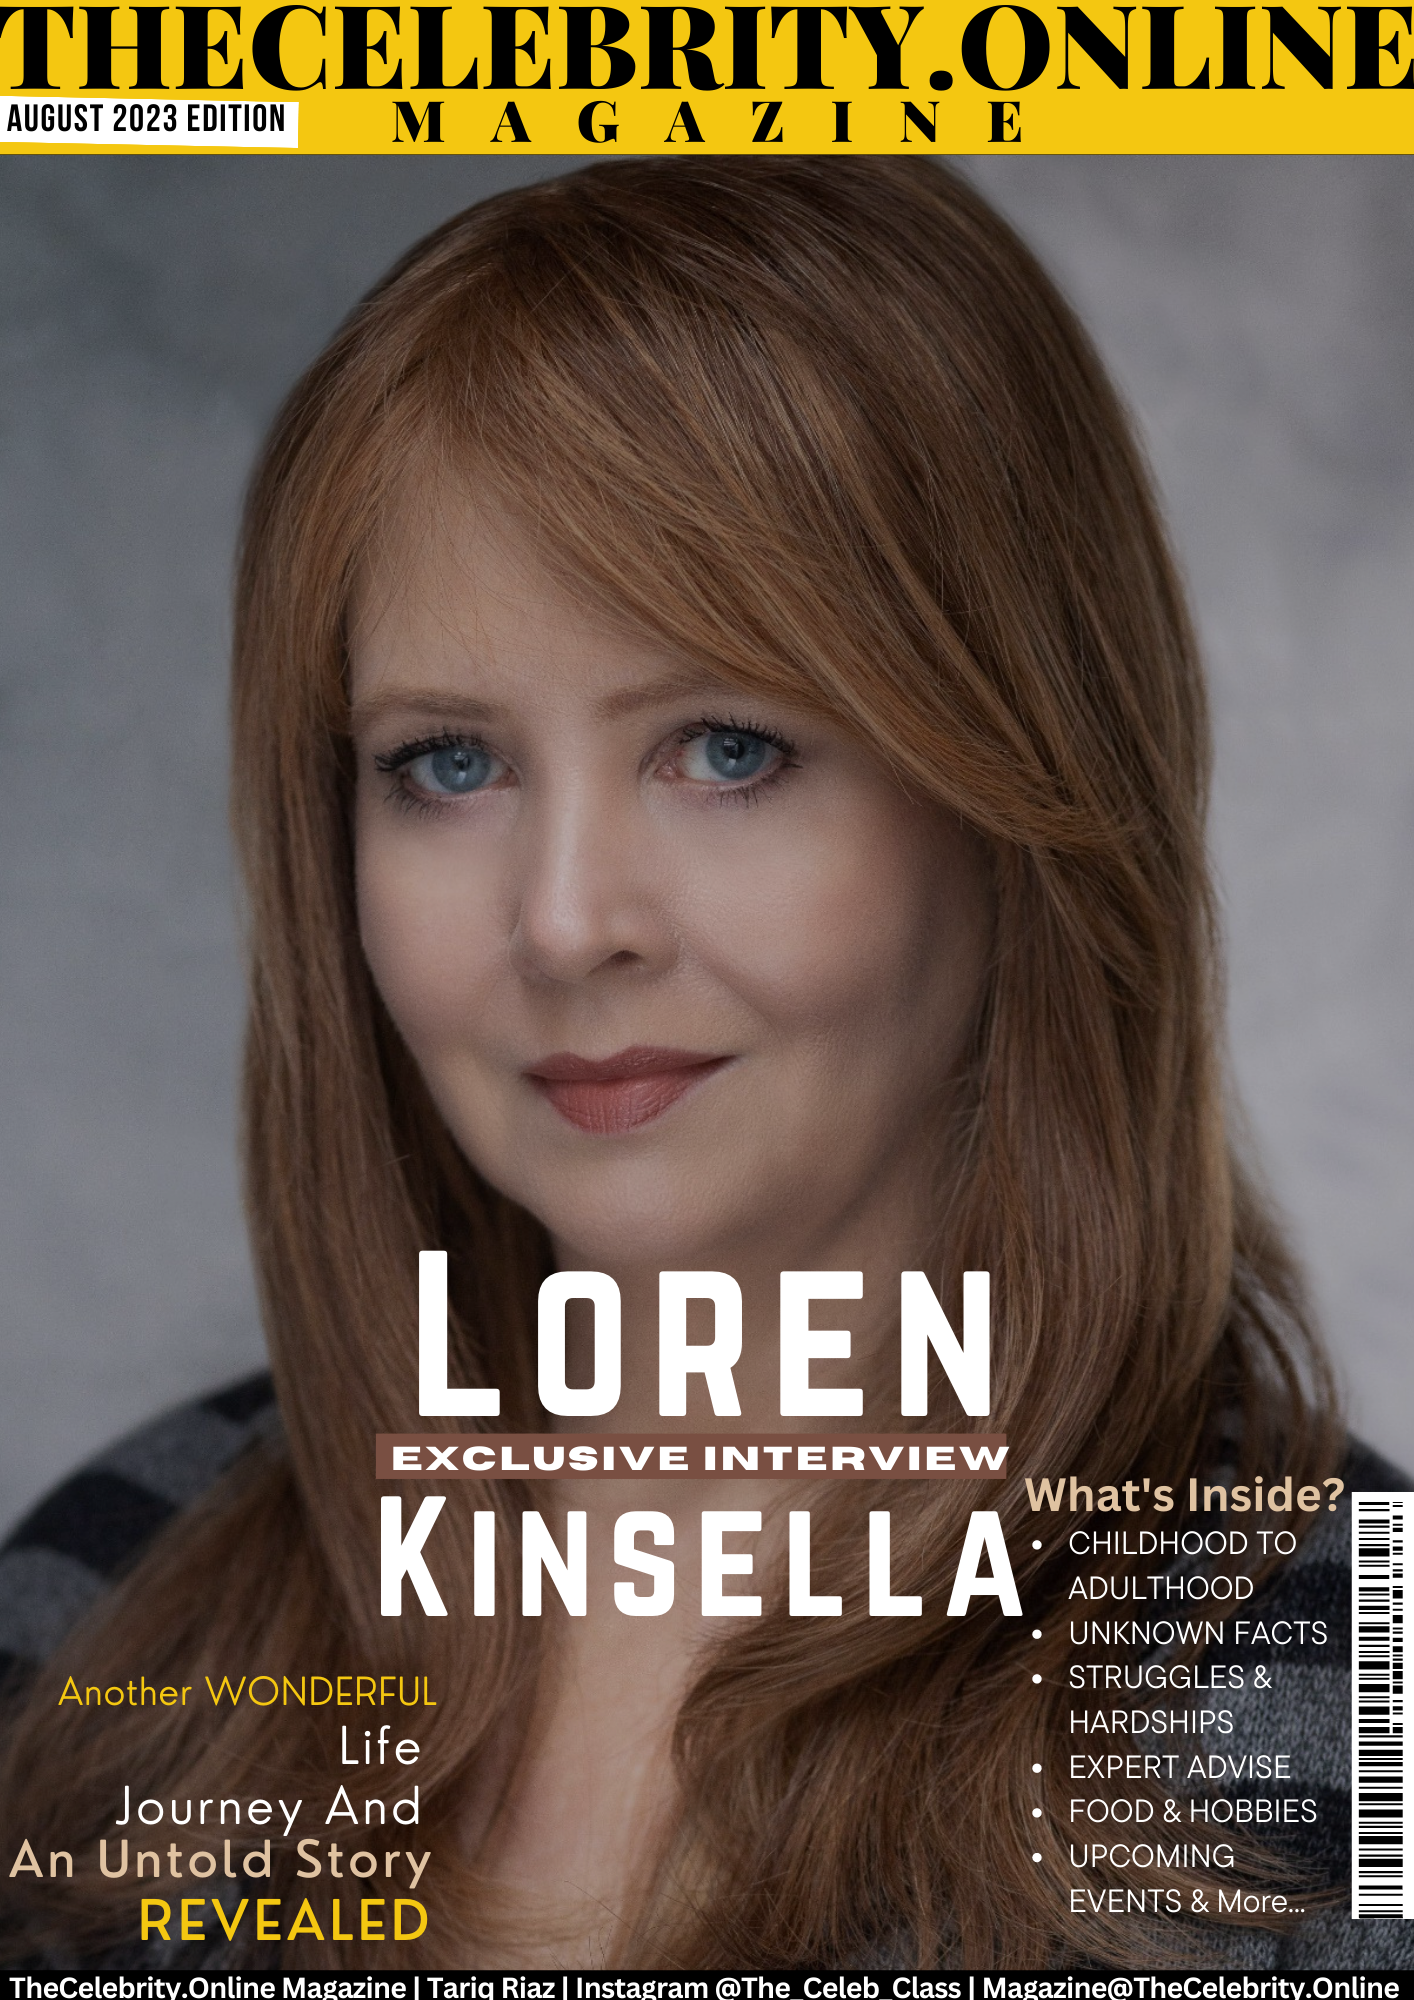 Loren Kinsella Exclusive Interview – ‘Embrace Curiosity And Never Stop Learning’